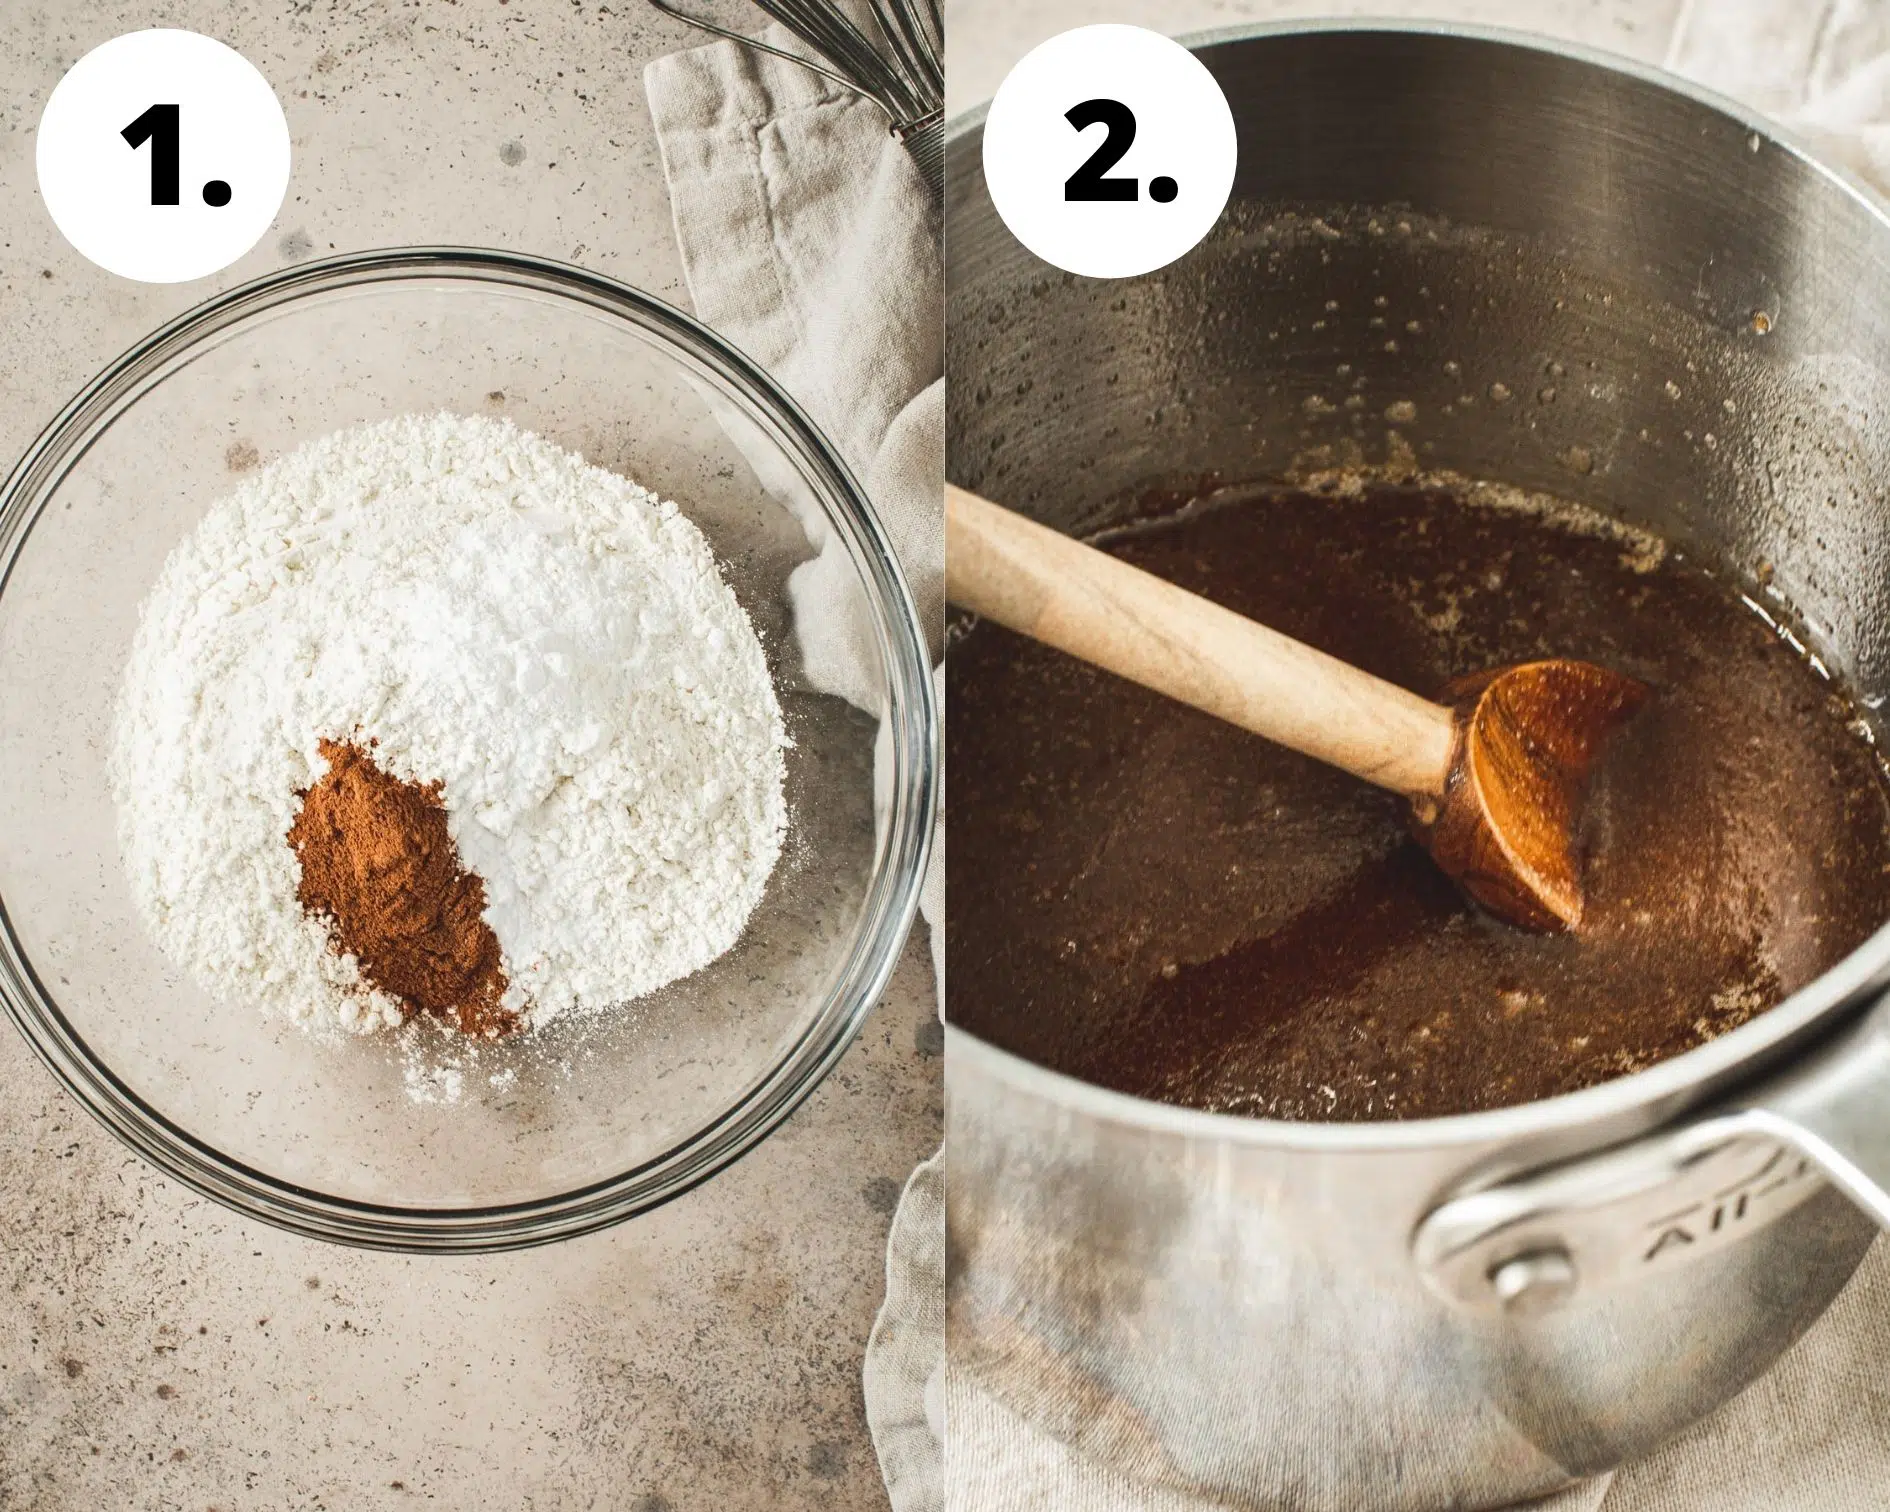 Cinnamon squares process steps 1 and 2.